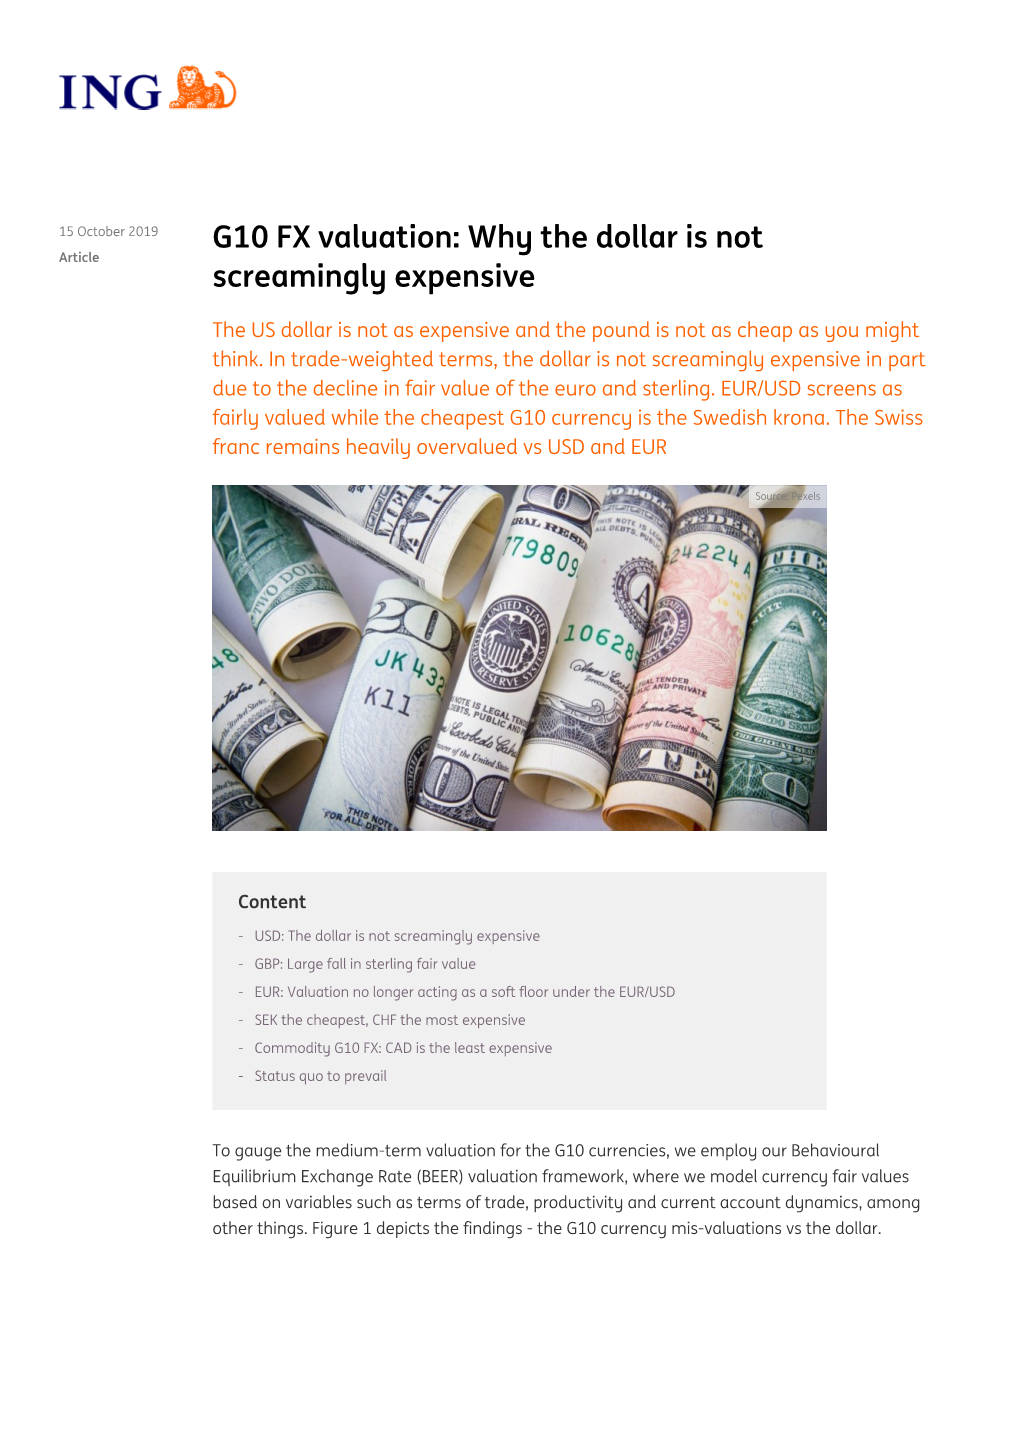 G10 FX Valuation: Why the Dollar Is Not Article Screamingly Expensive